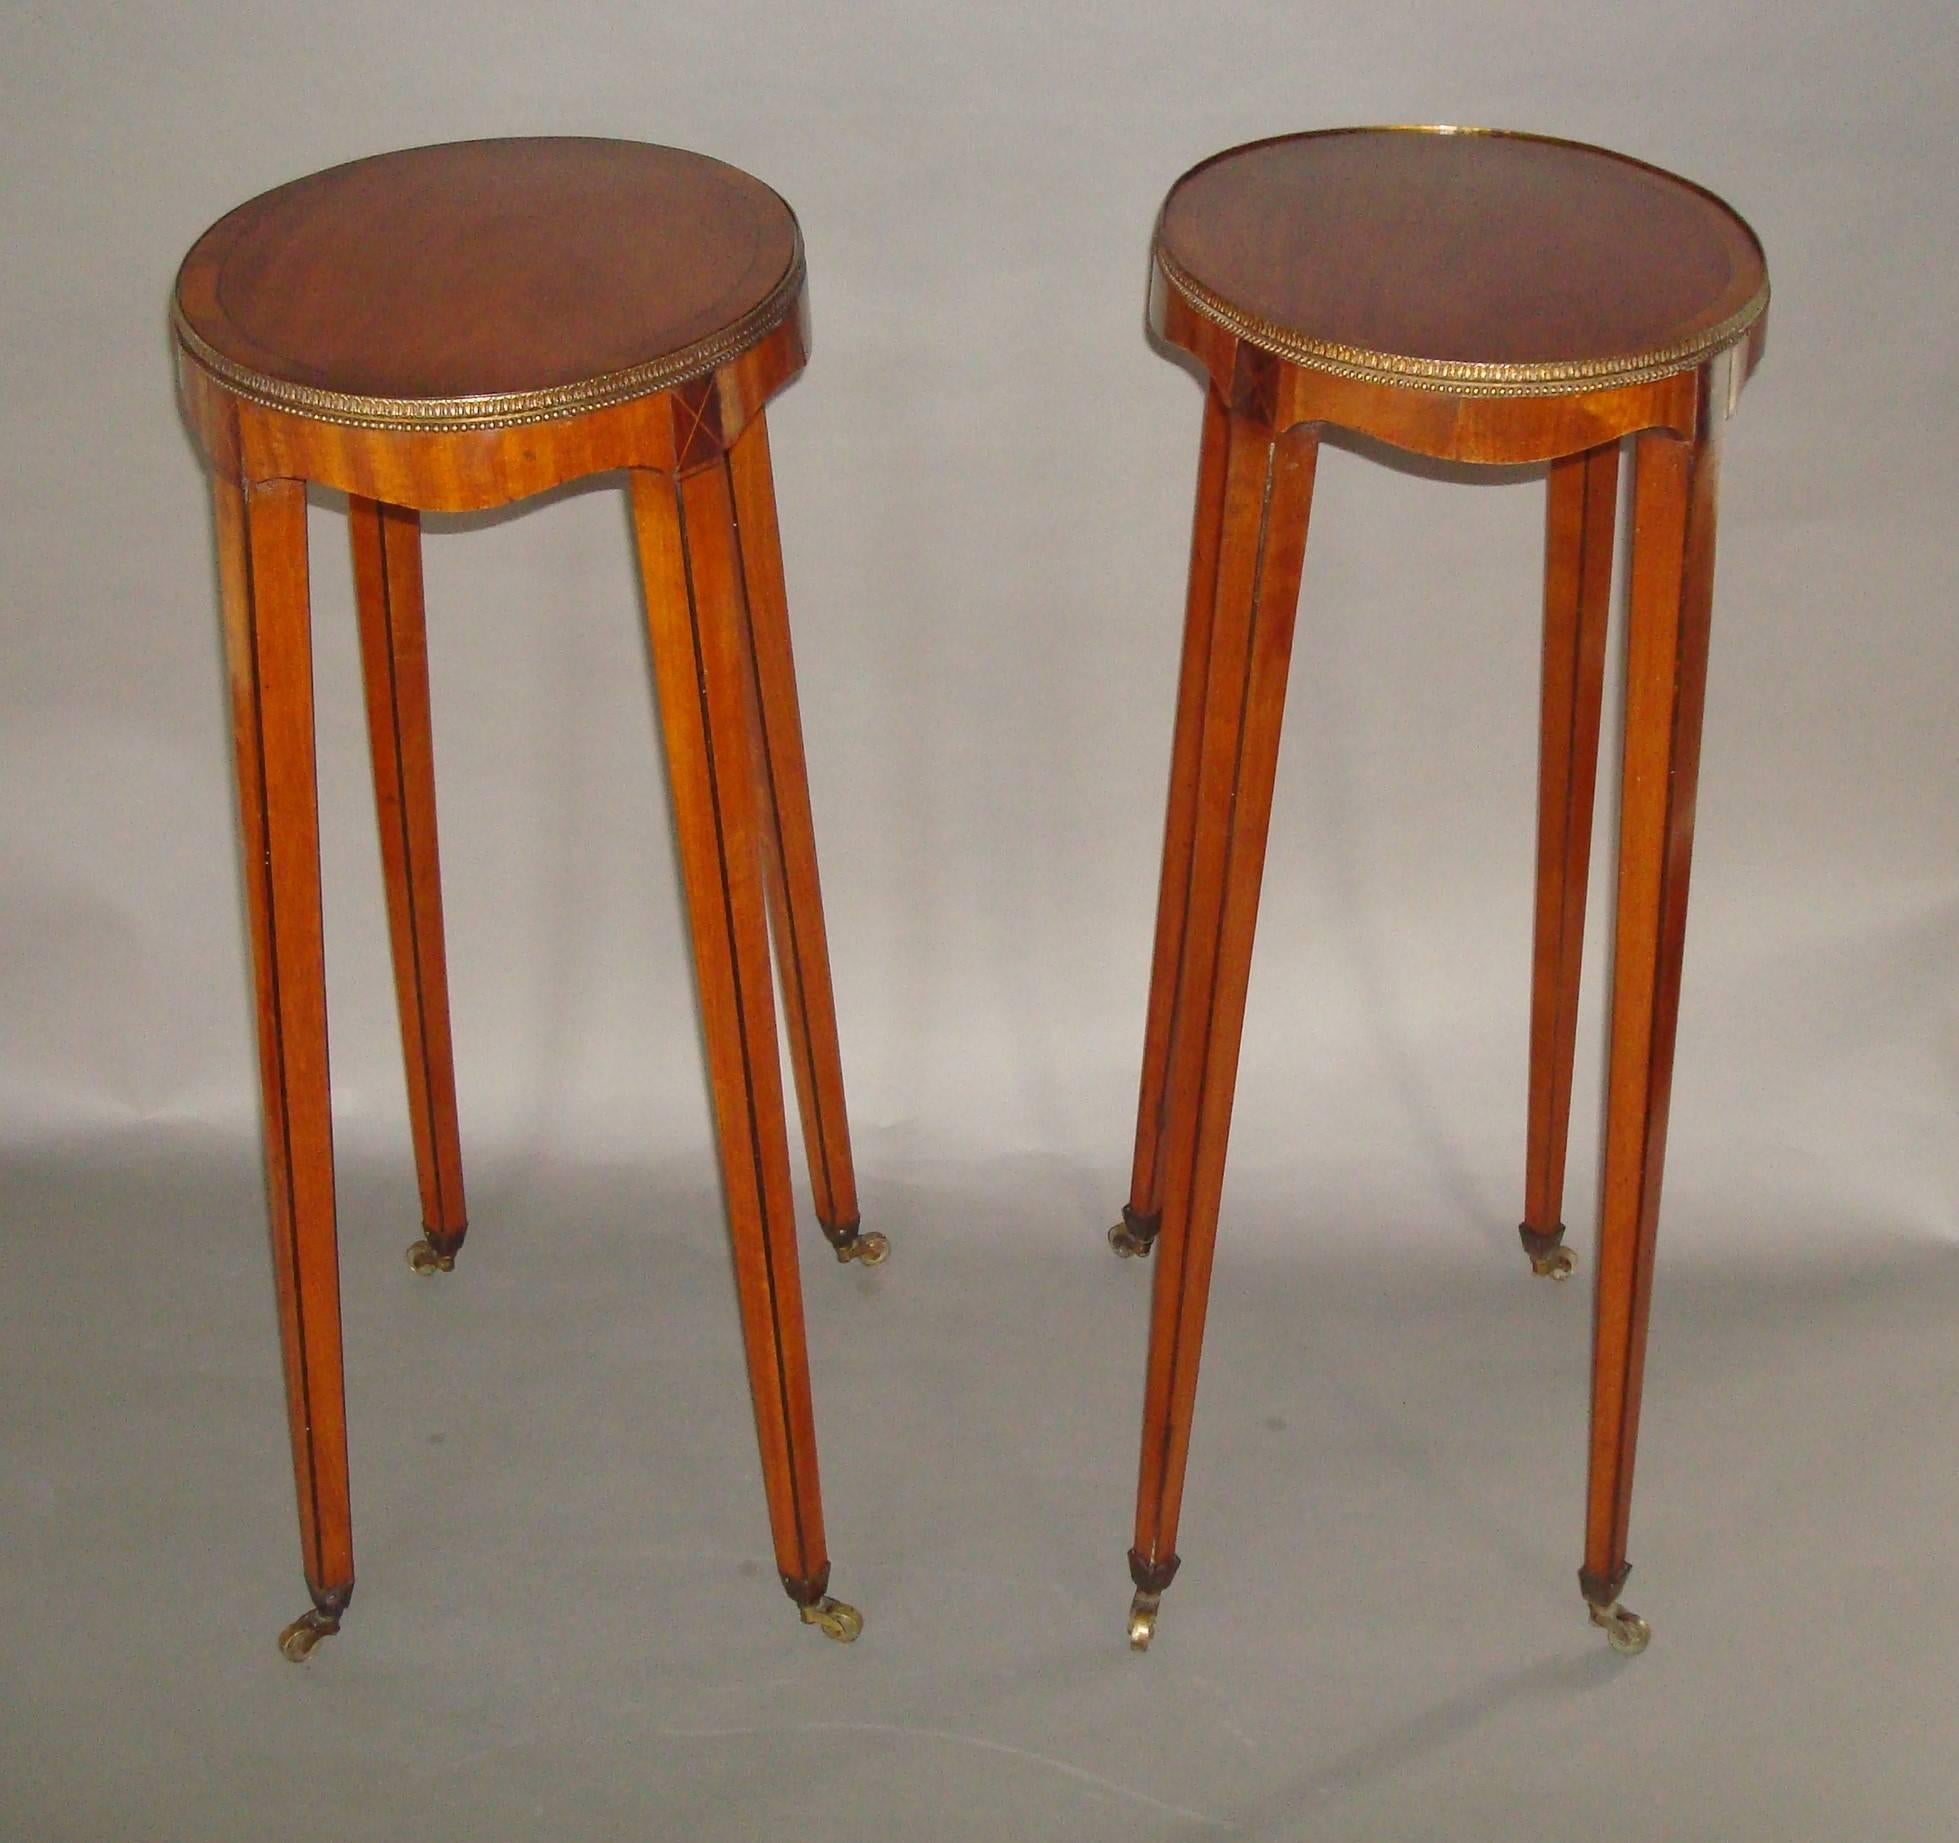 Elegant George III Matched Pair of Satinwood Urn Stands For Sale 2